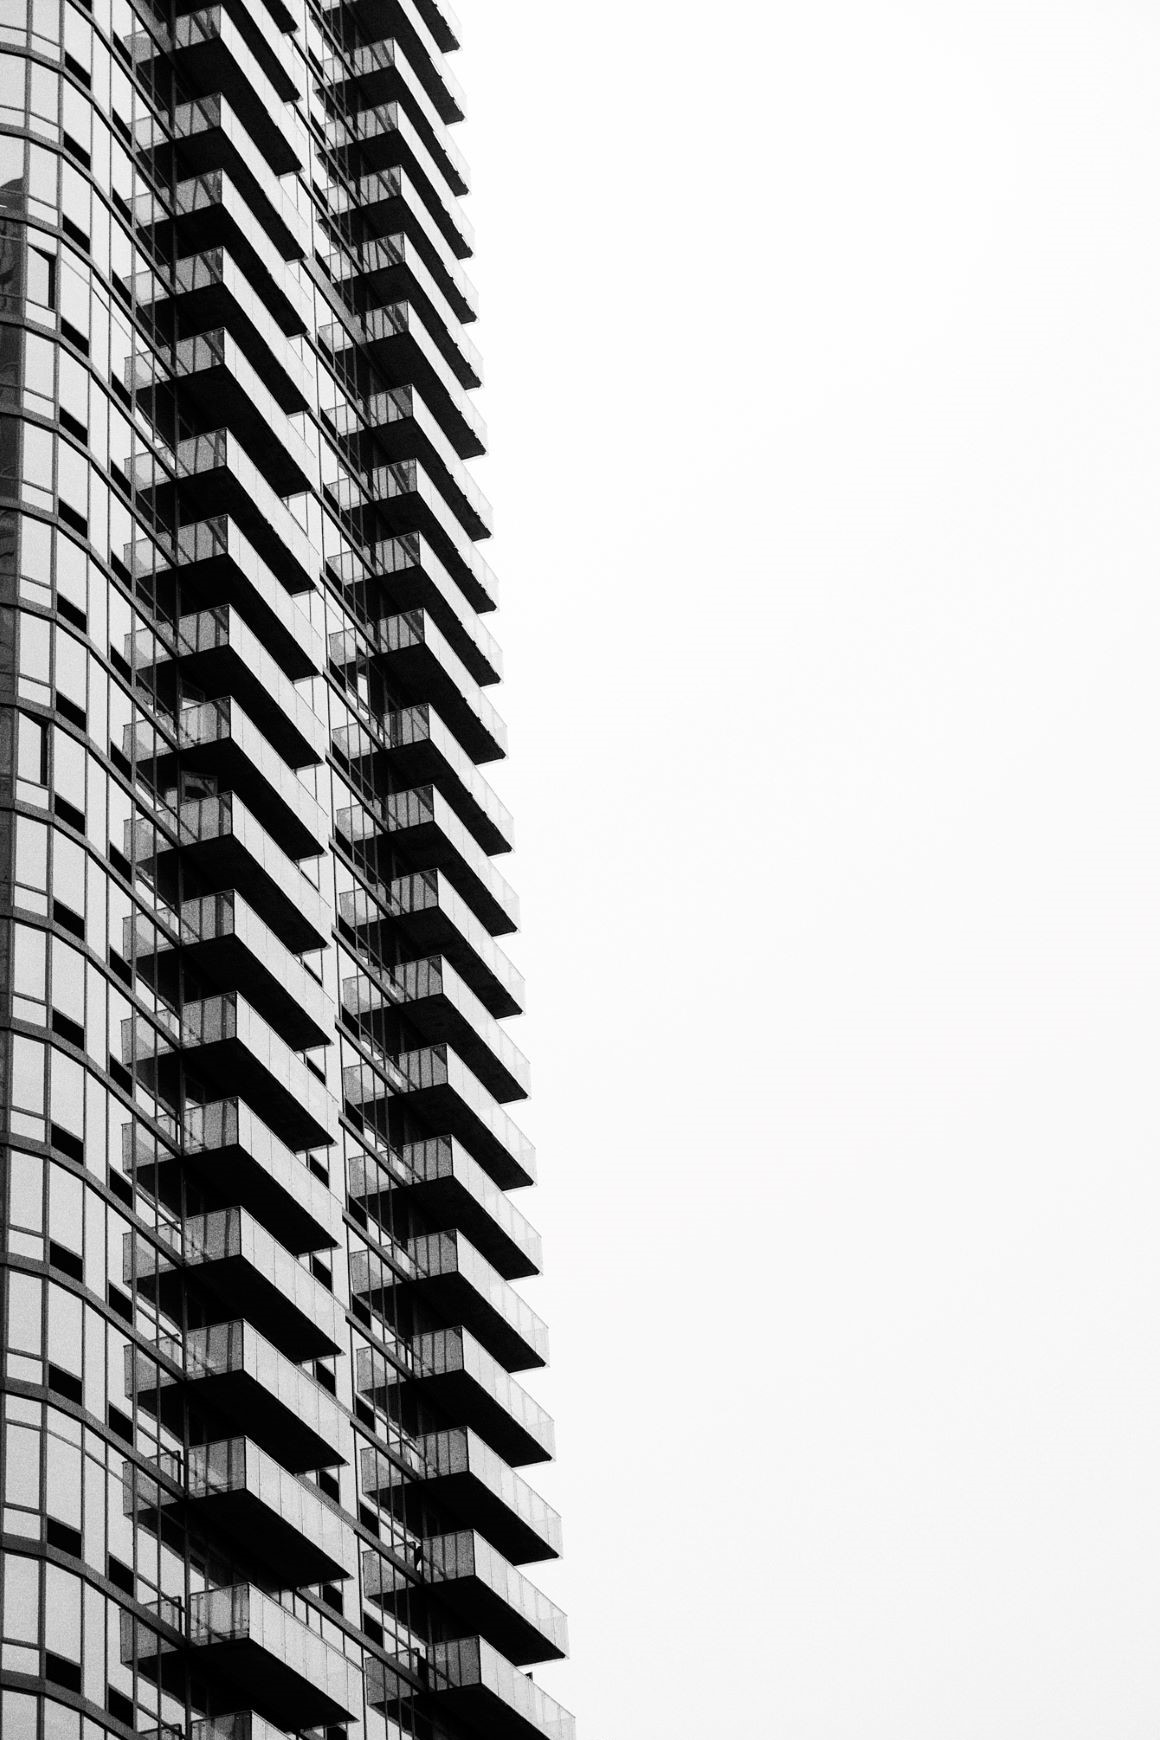 Silouhette of a skyscraper against the sky, with a lone person on their balcony